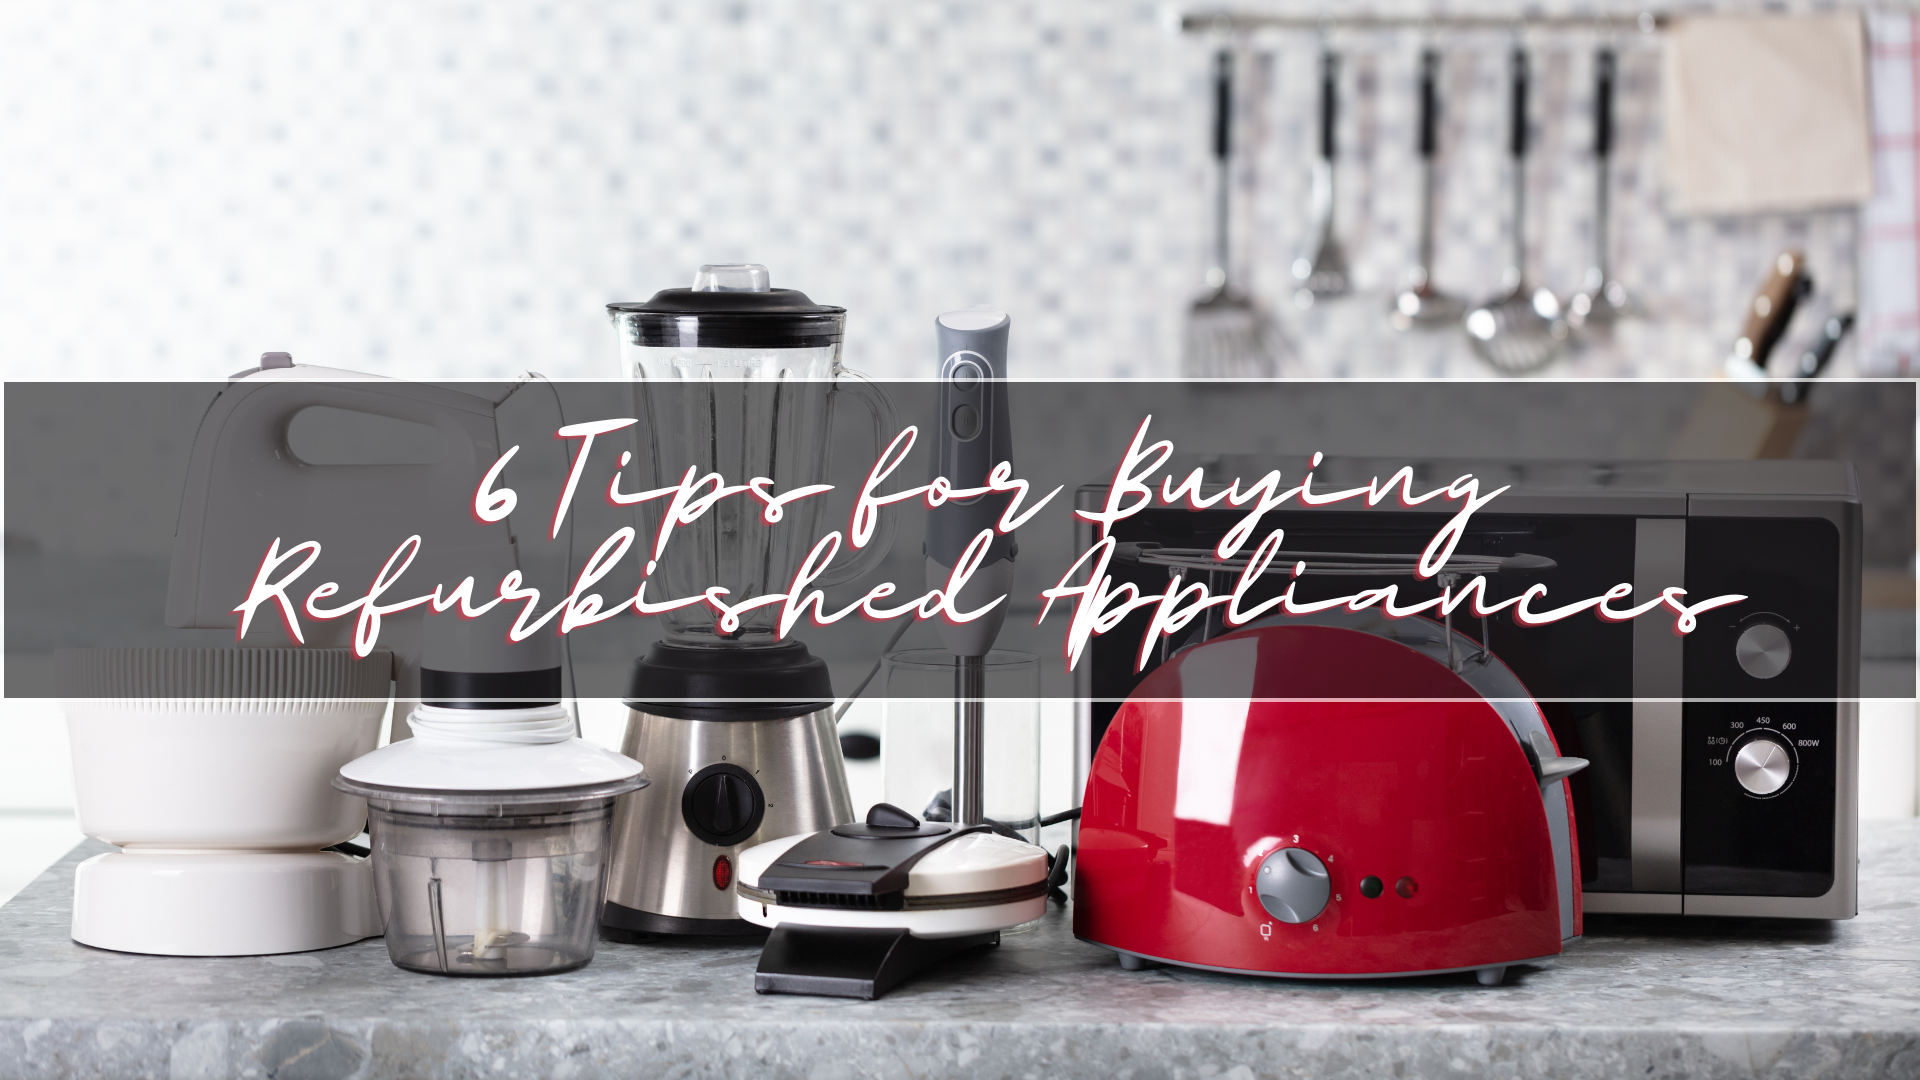 6 Tips for Buying Refurbished Appliances